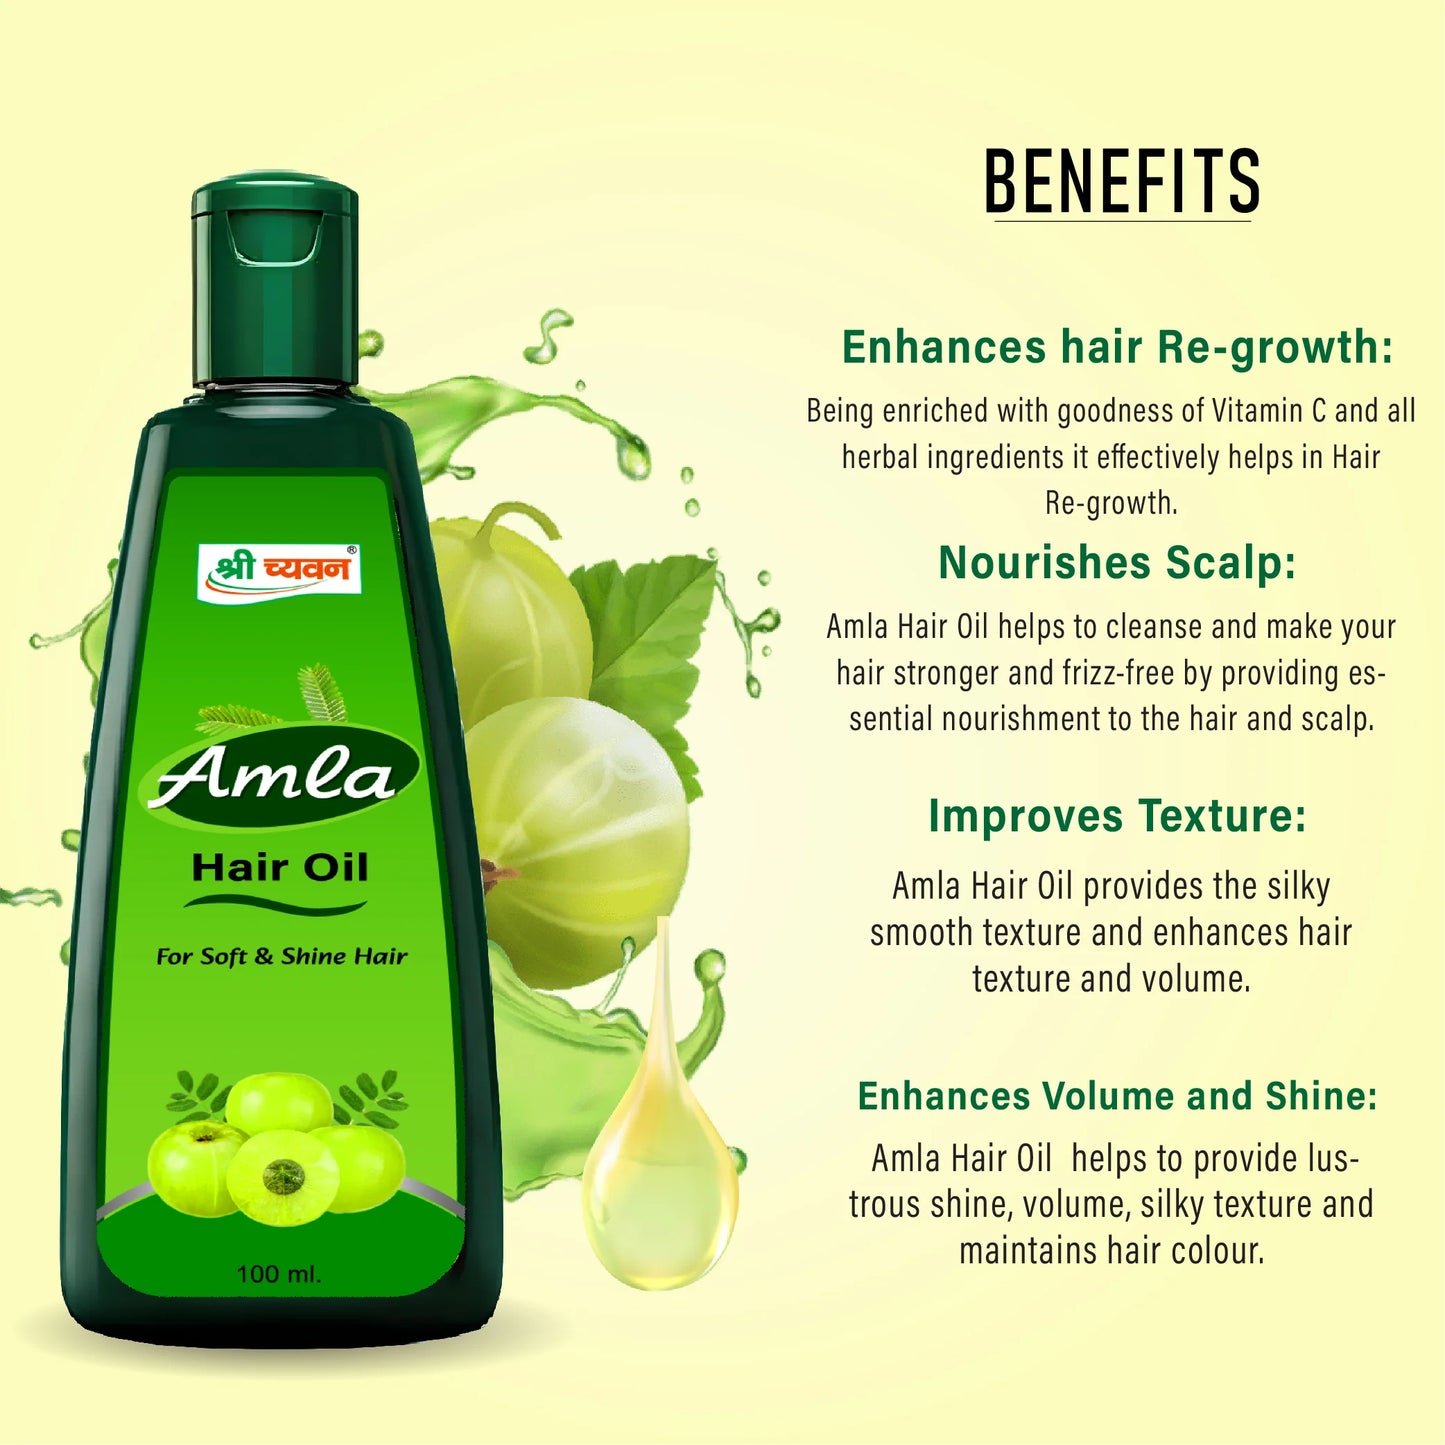 Benefits of amla: How amla boosts hair growth and makes hair